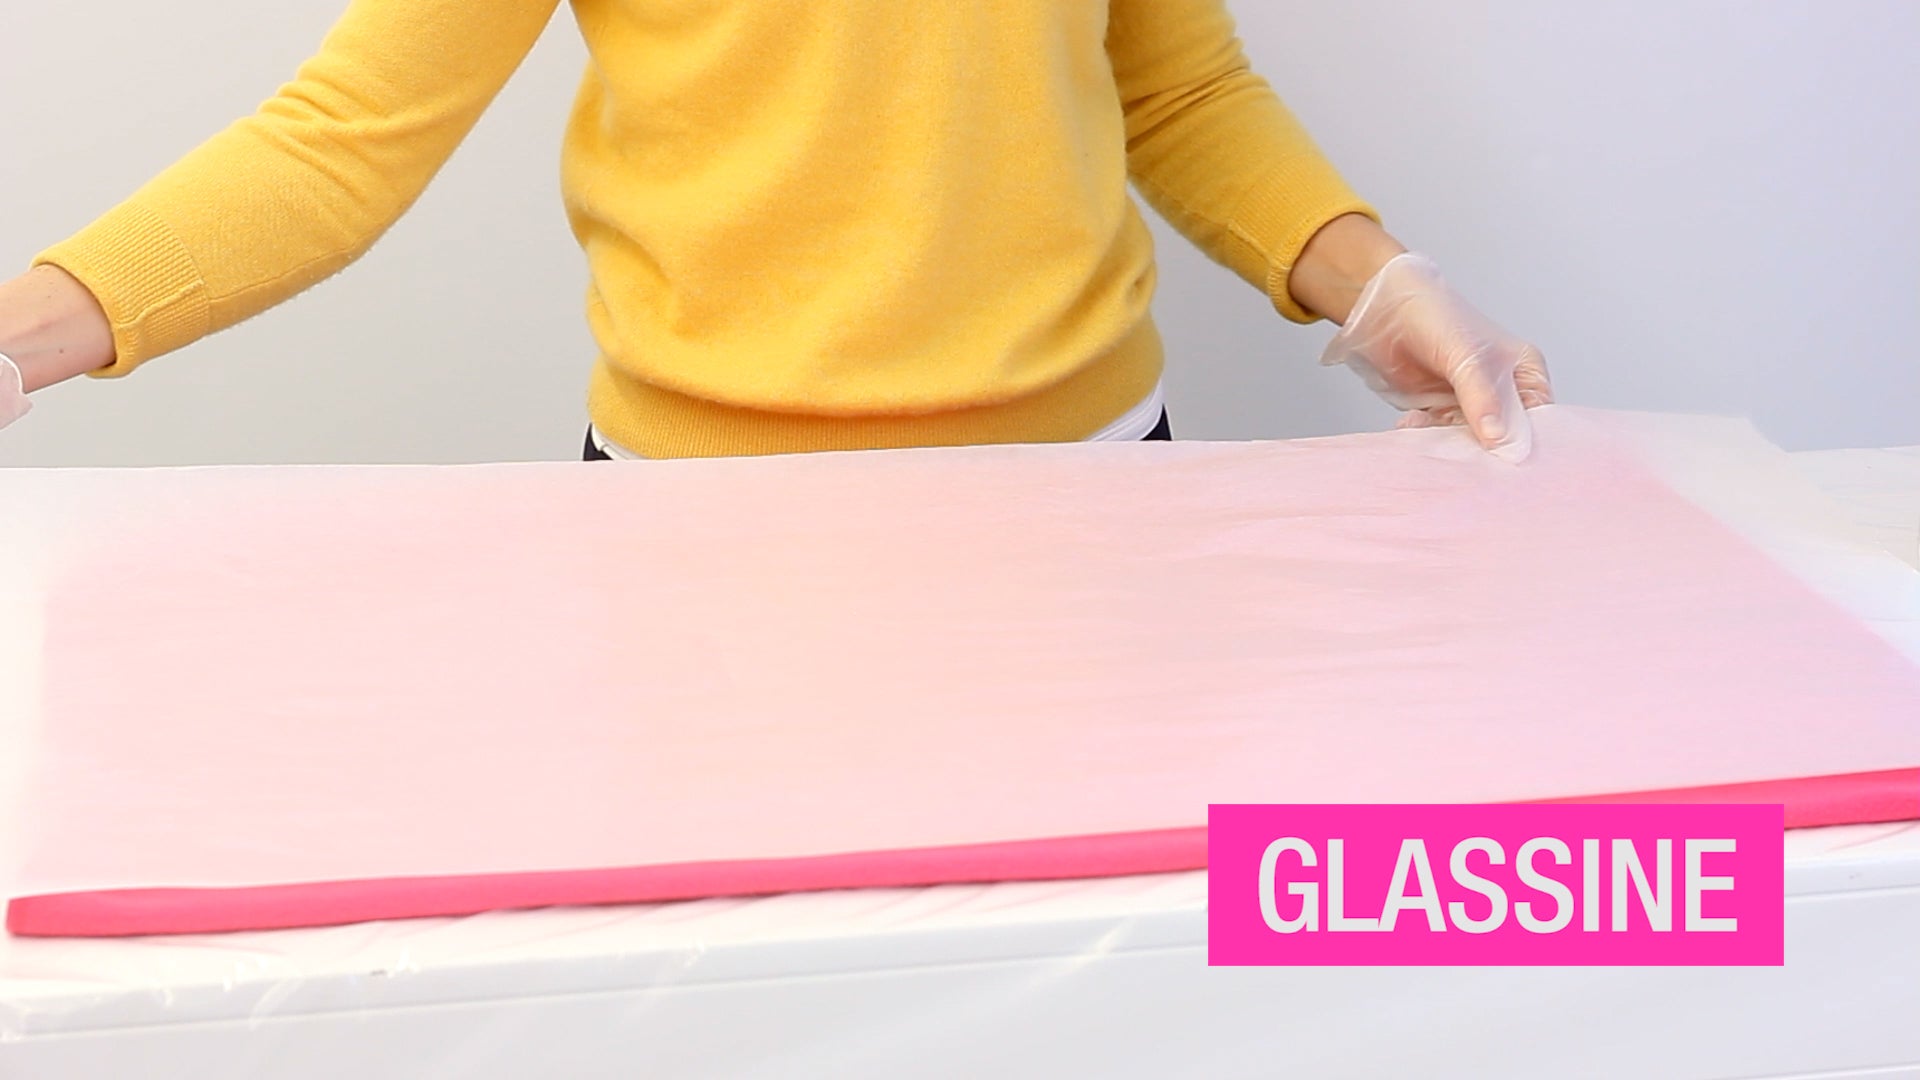 Best Way To Pack Resin Art - Glassine is a glossy, super smooth